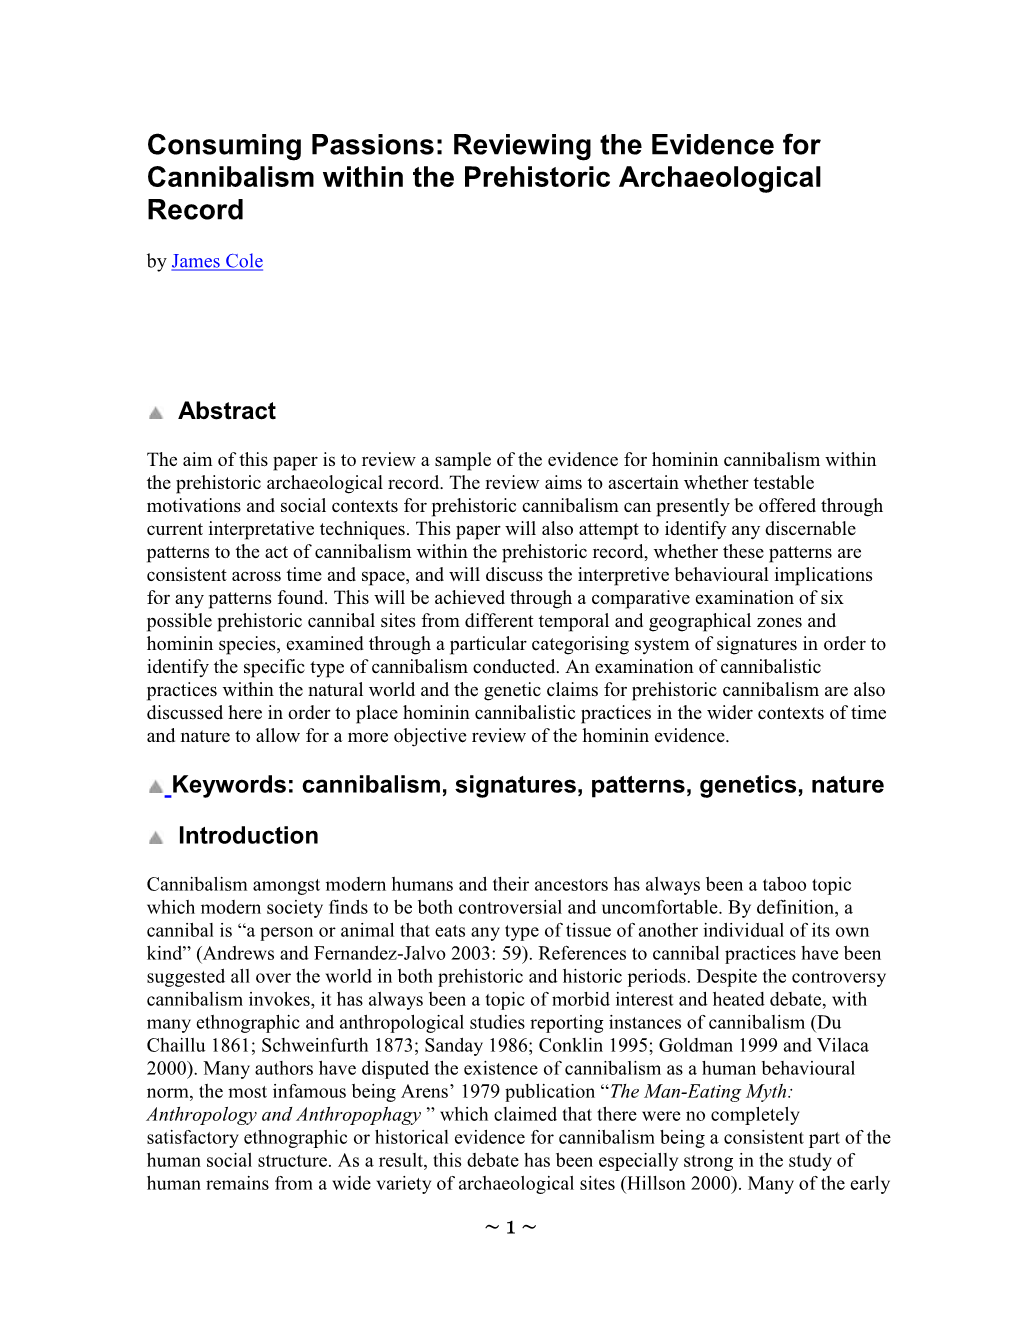 Consuming Passions: Reviewing the Evidence for Cannibalism Within the Prehistoric Archaeological Record by James Cole